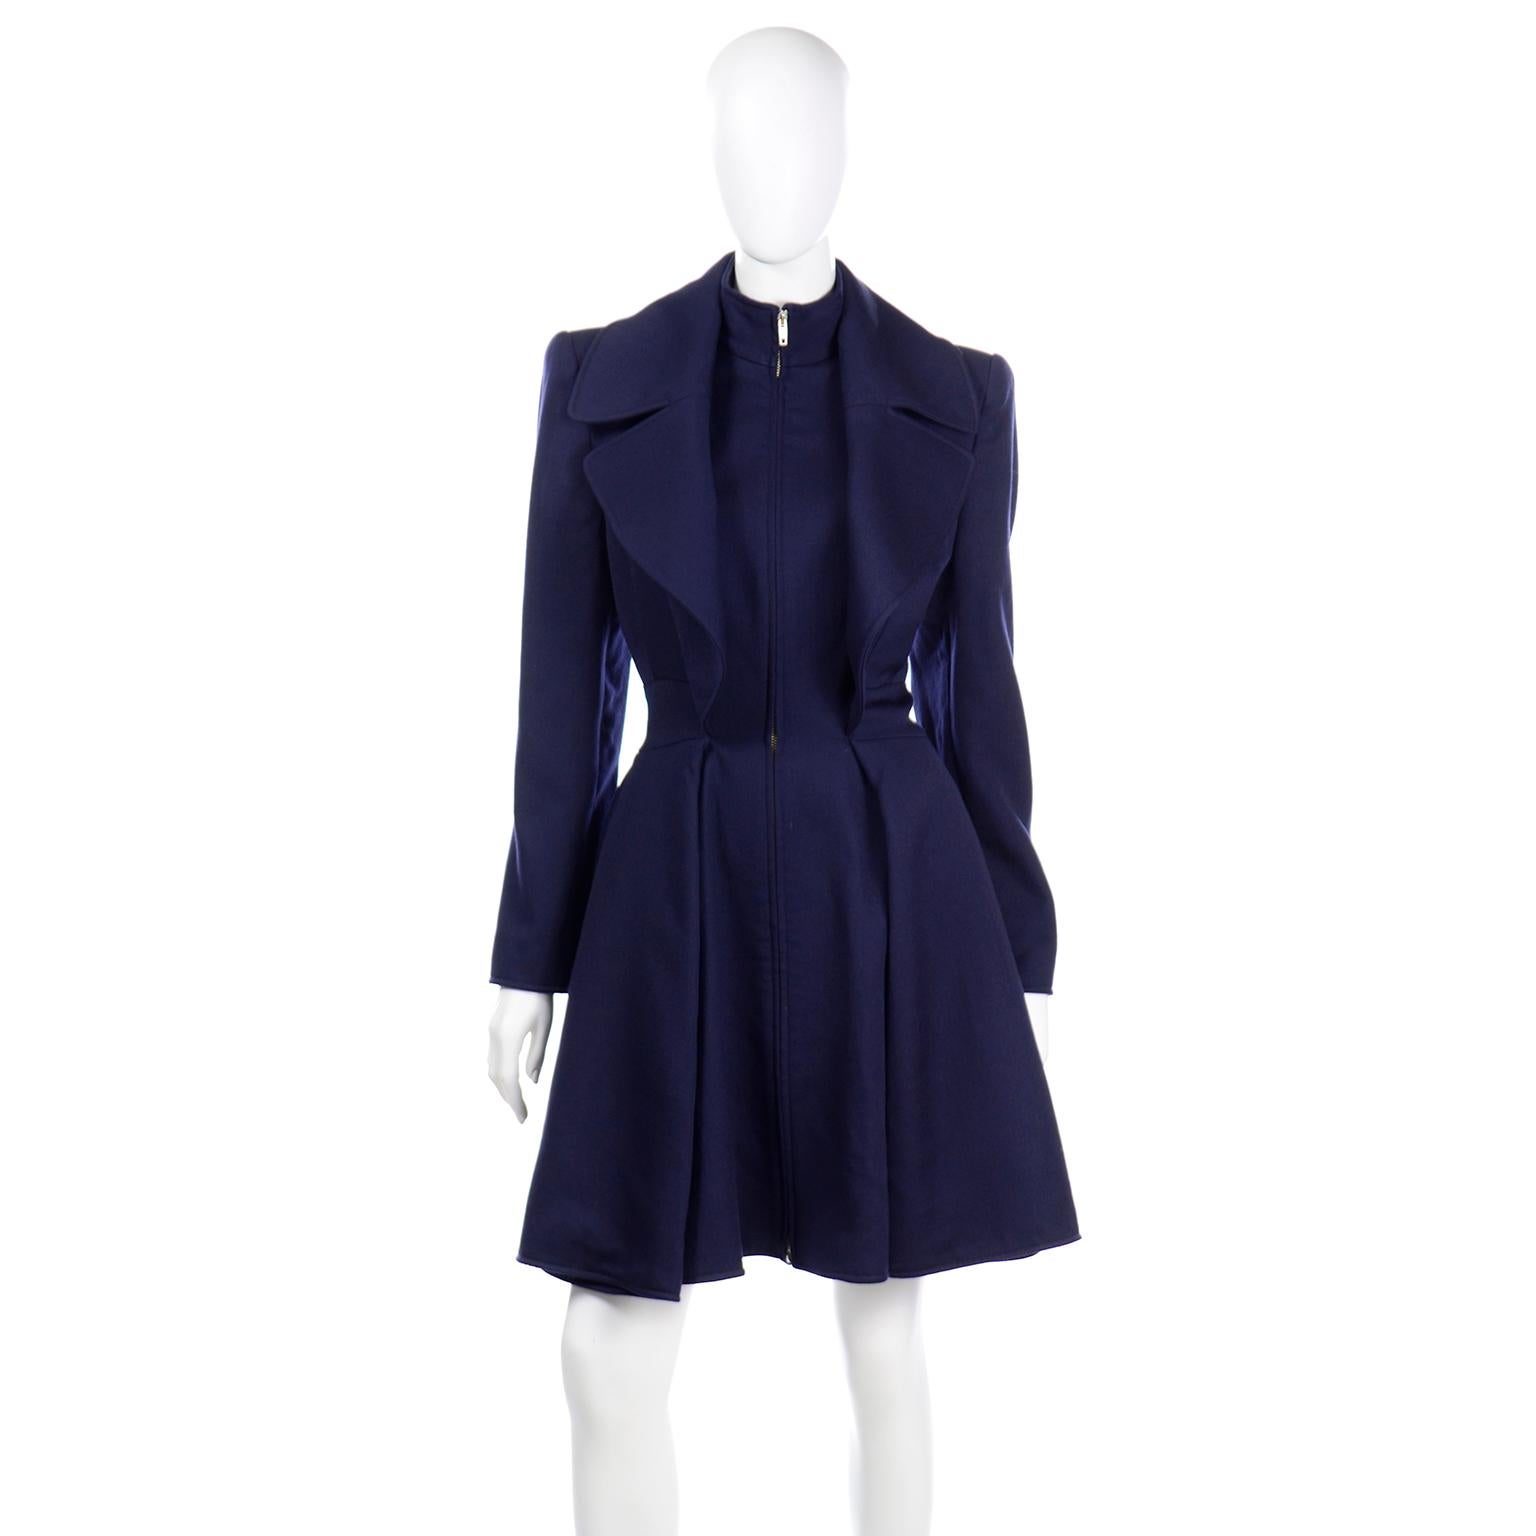 This vintage Claude Montana princess style coat is absolutely breathtaking! The coat is in a luxe royal blue fine wool and is fully lined. We love the way the zipper is partially concealed by the extra wide lapels, giving the illusion of layered